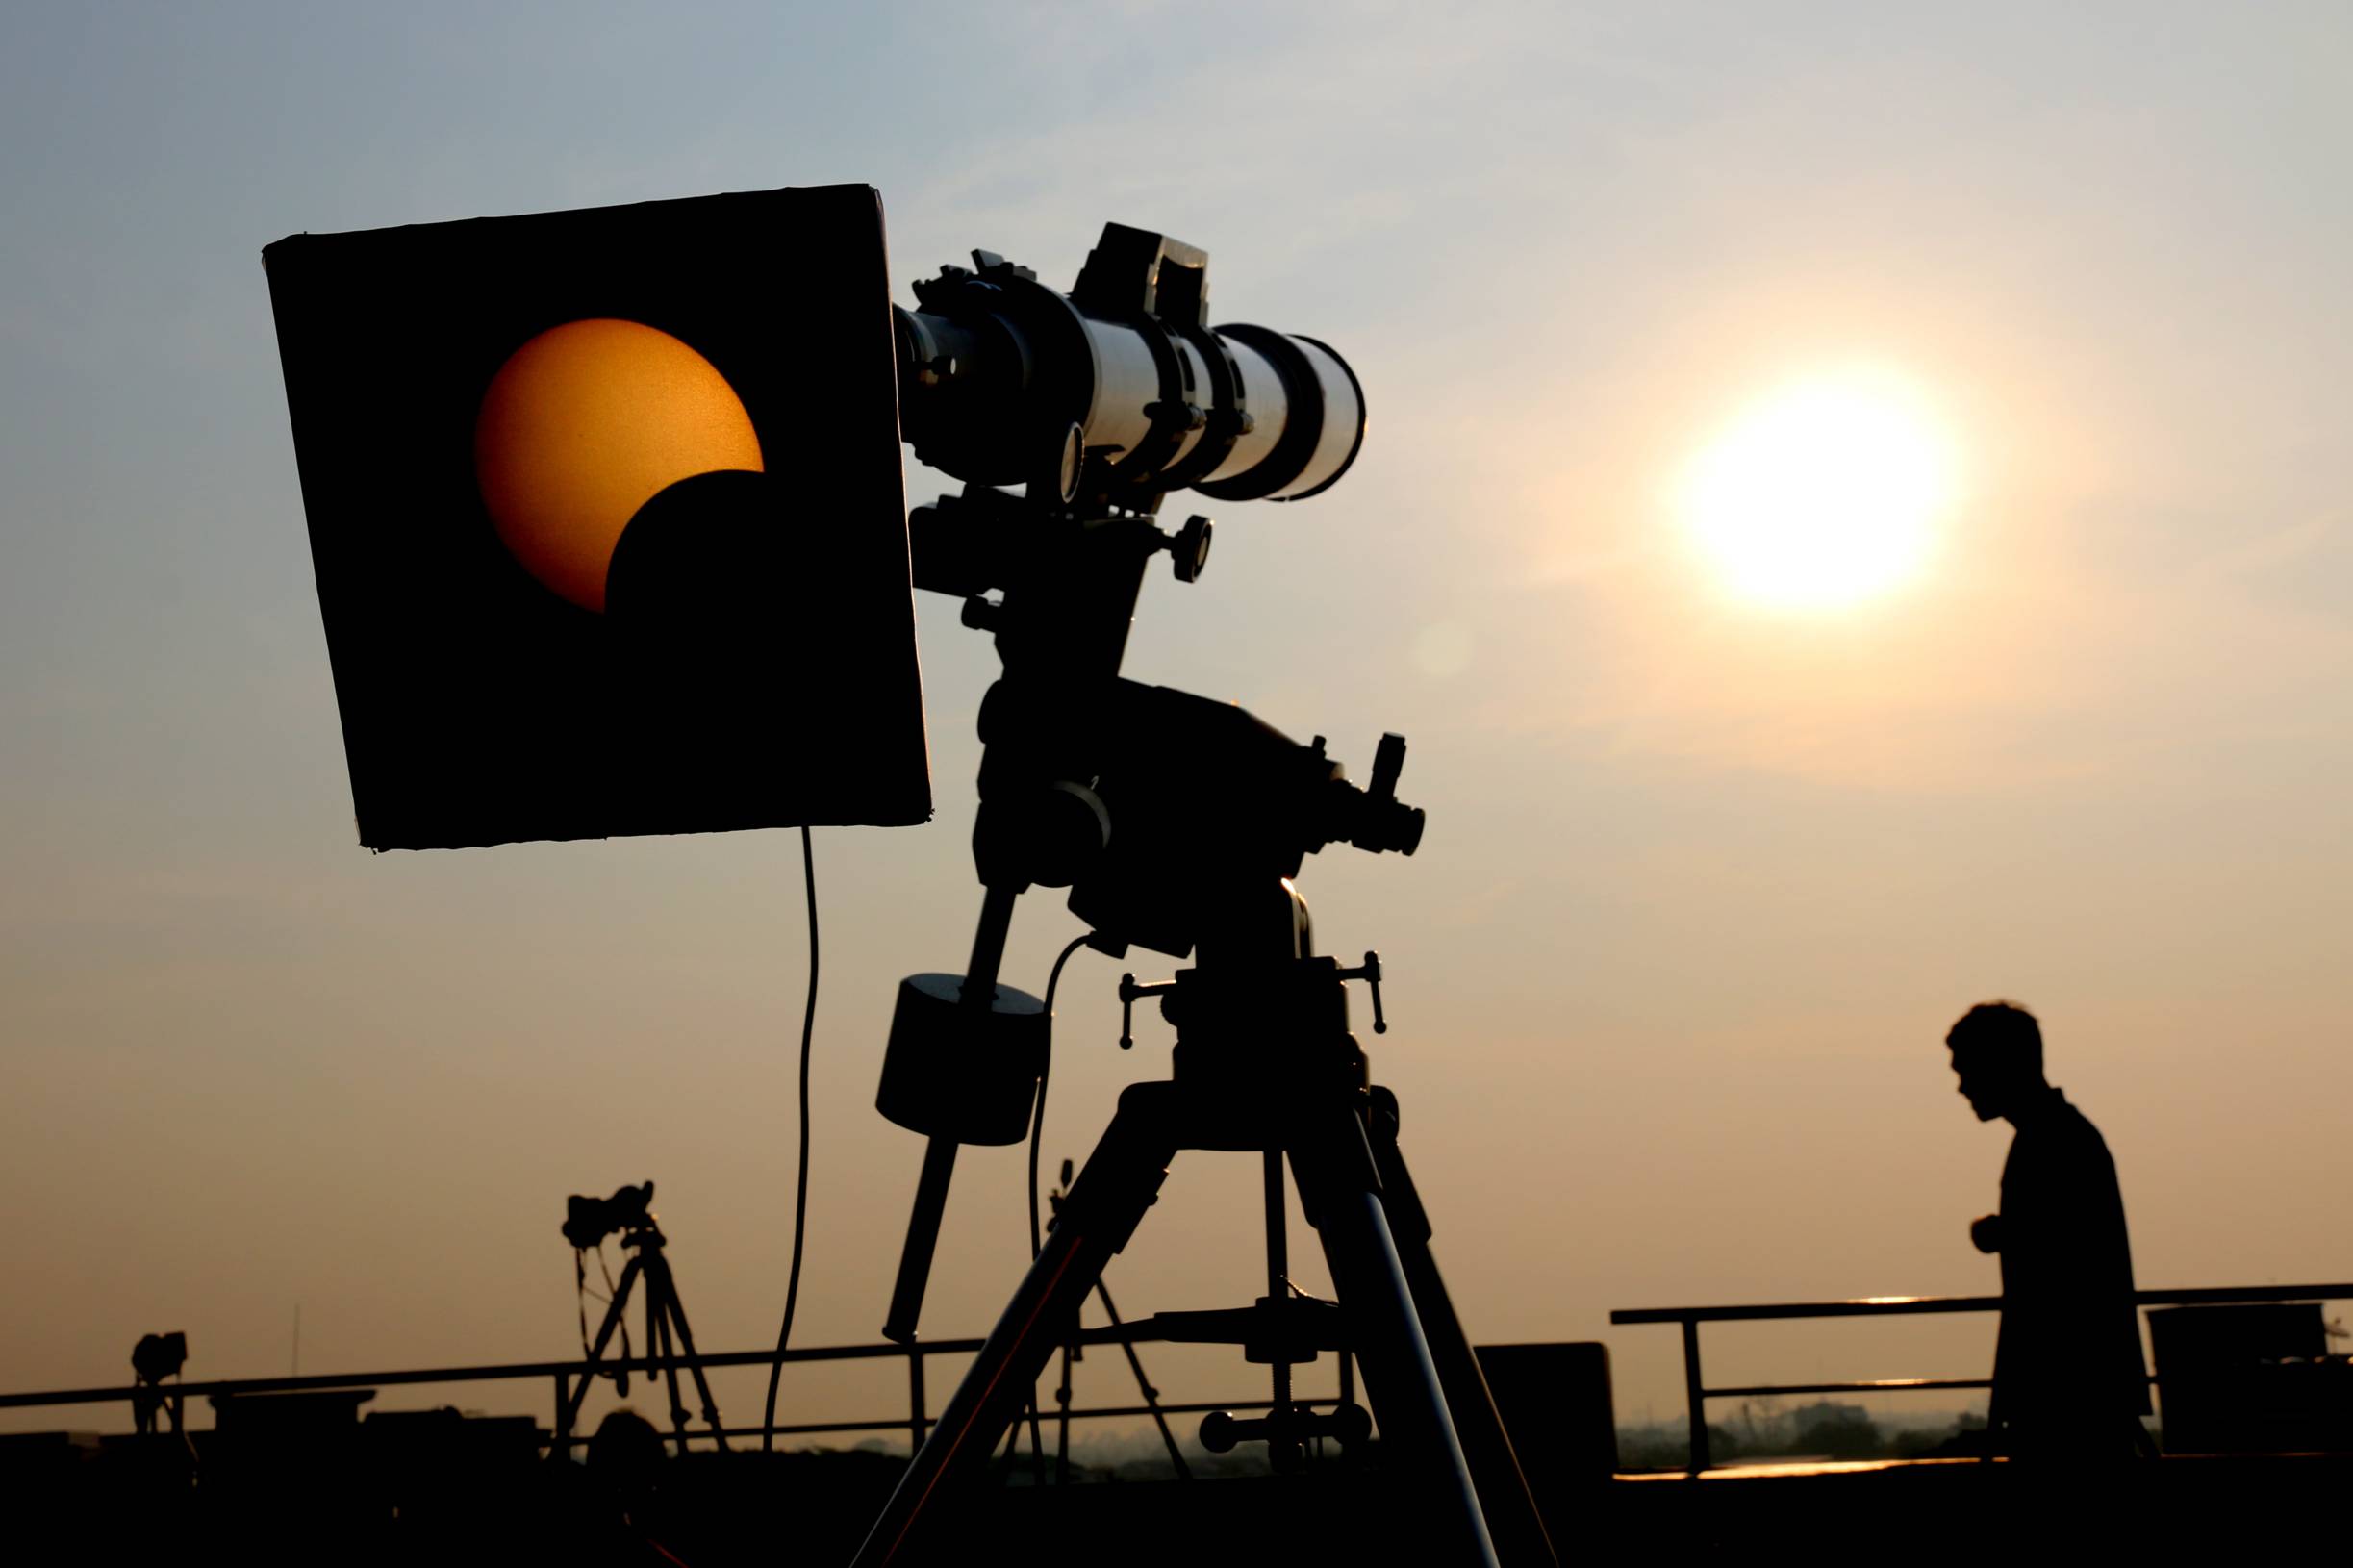 a telescope pointed at the sun